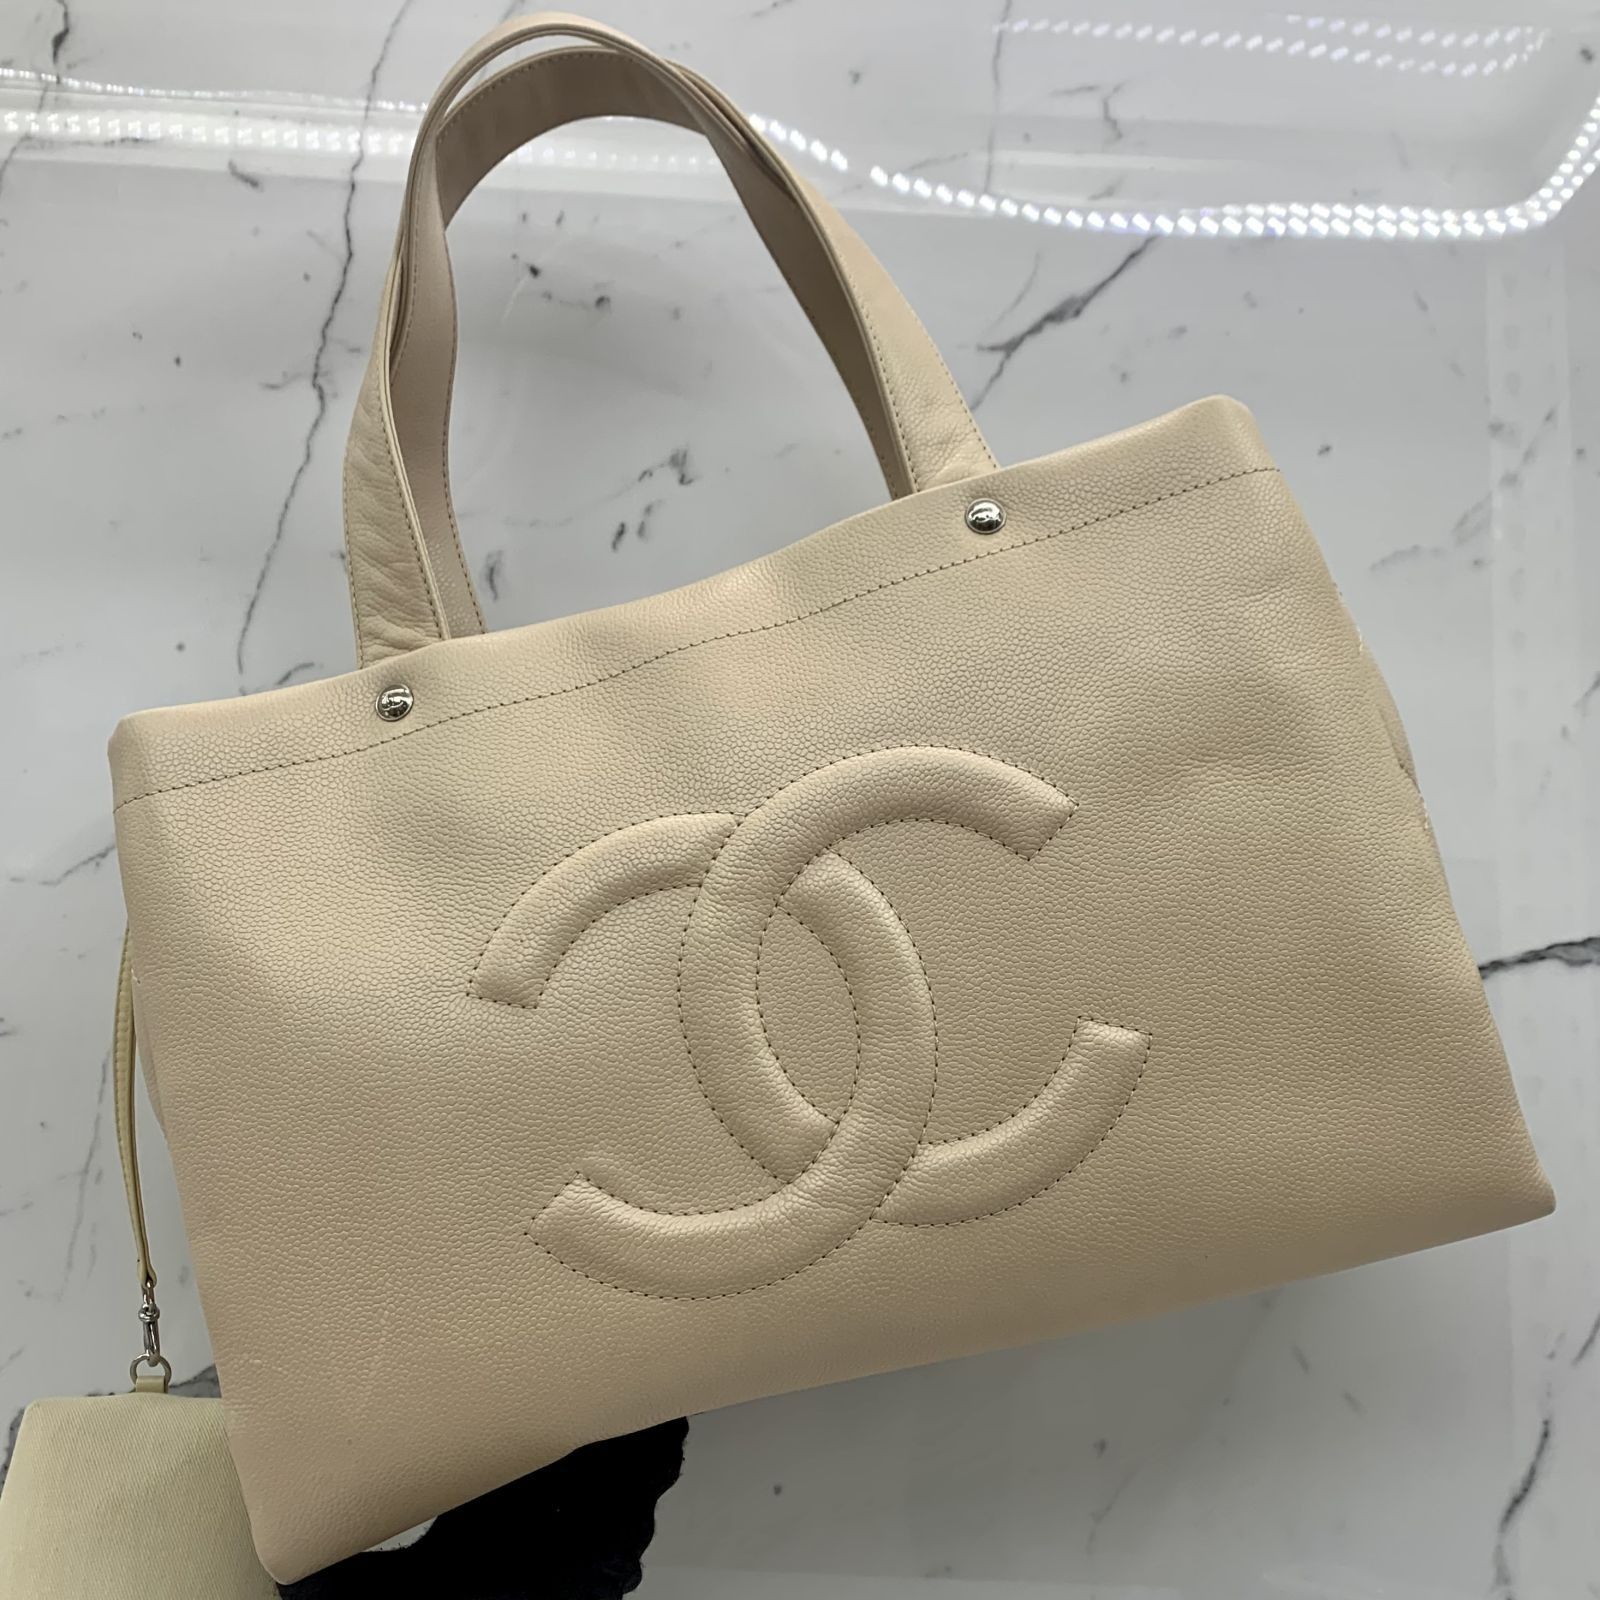 CHANEL BEIGE CAVIAR SKIN COCO MARK WITH POUCH TOTE BAG 237026537